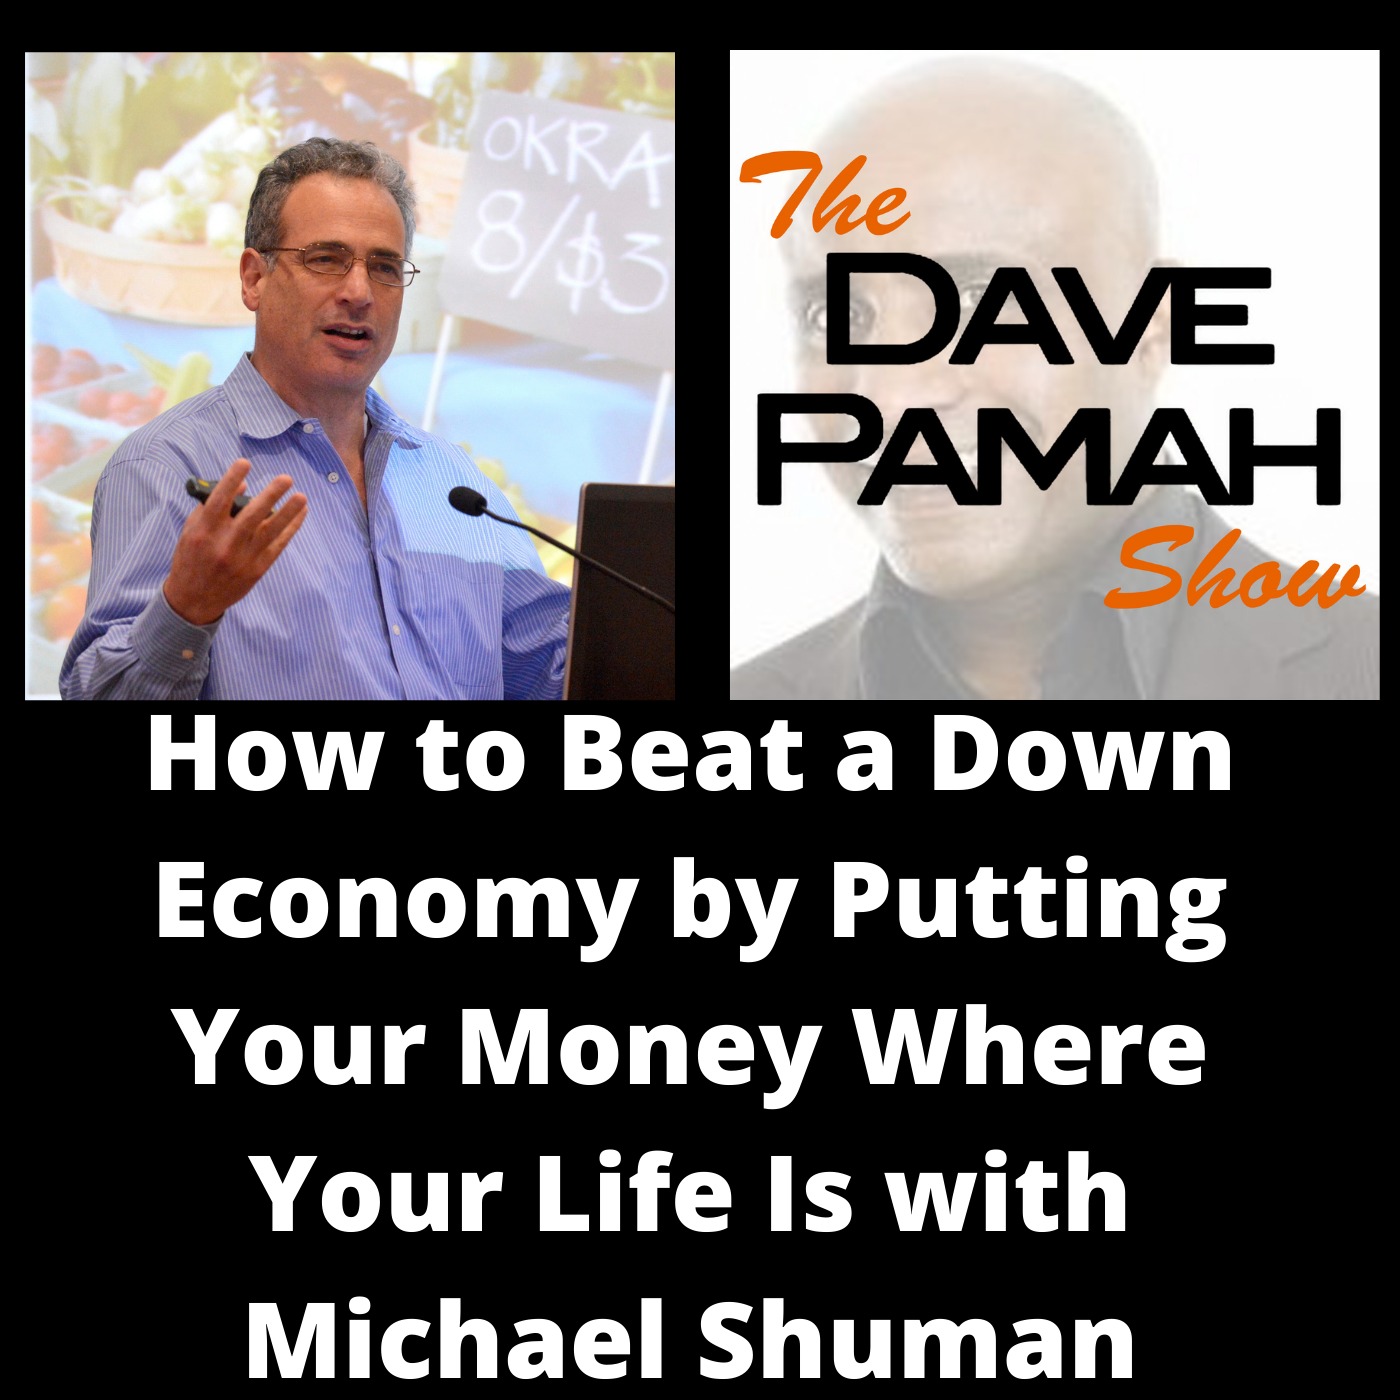 How to Beat a Down Economy by Putting Your Money Where Your Life Is with Michael Shuman